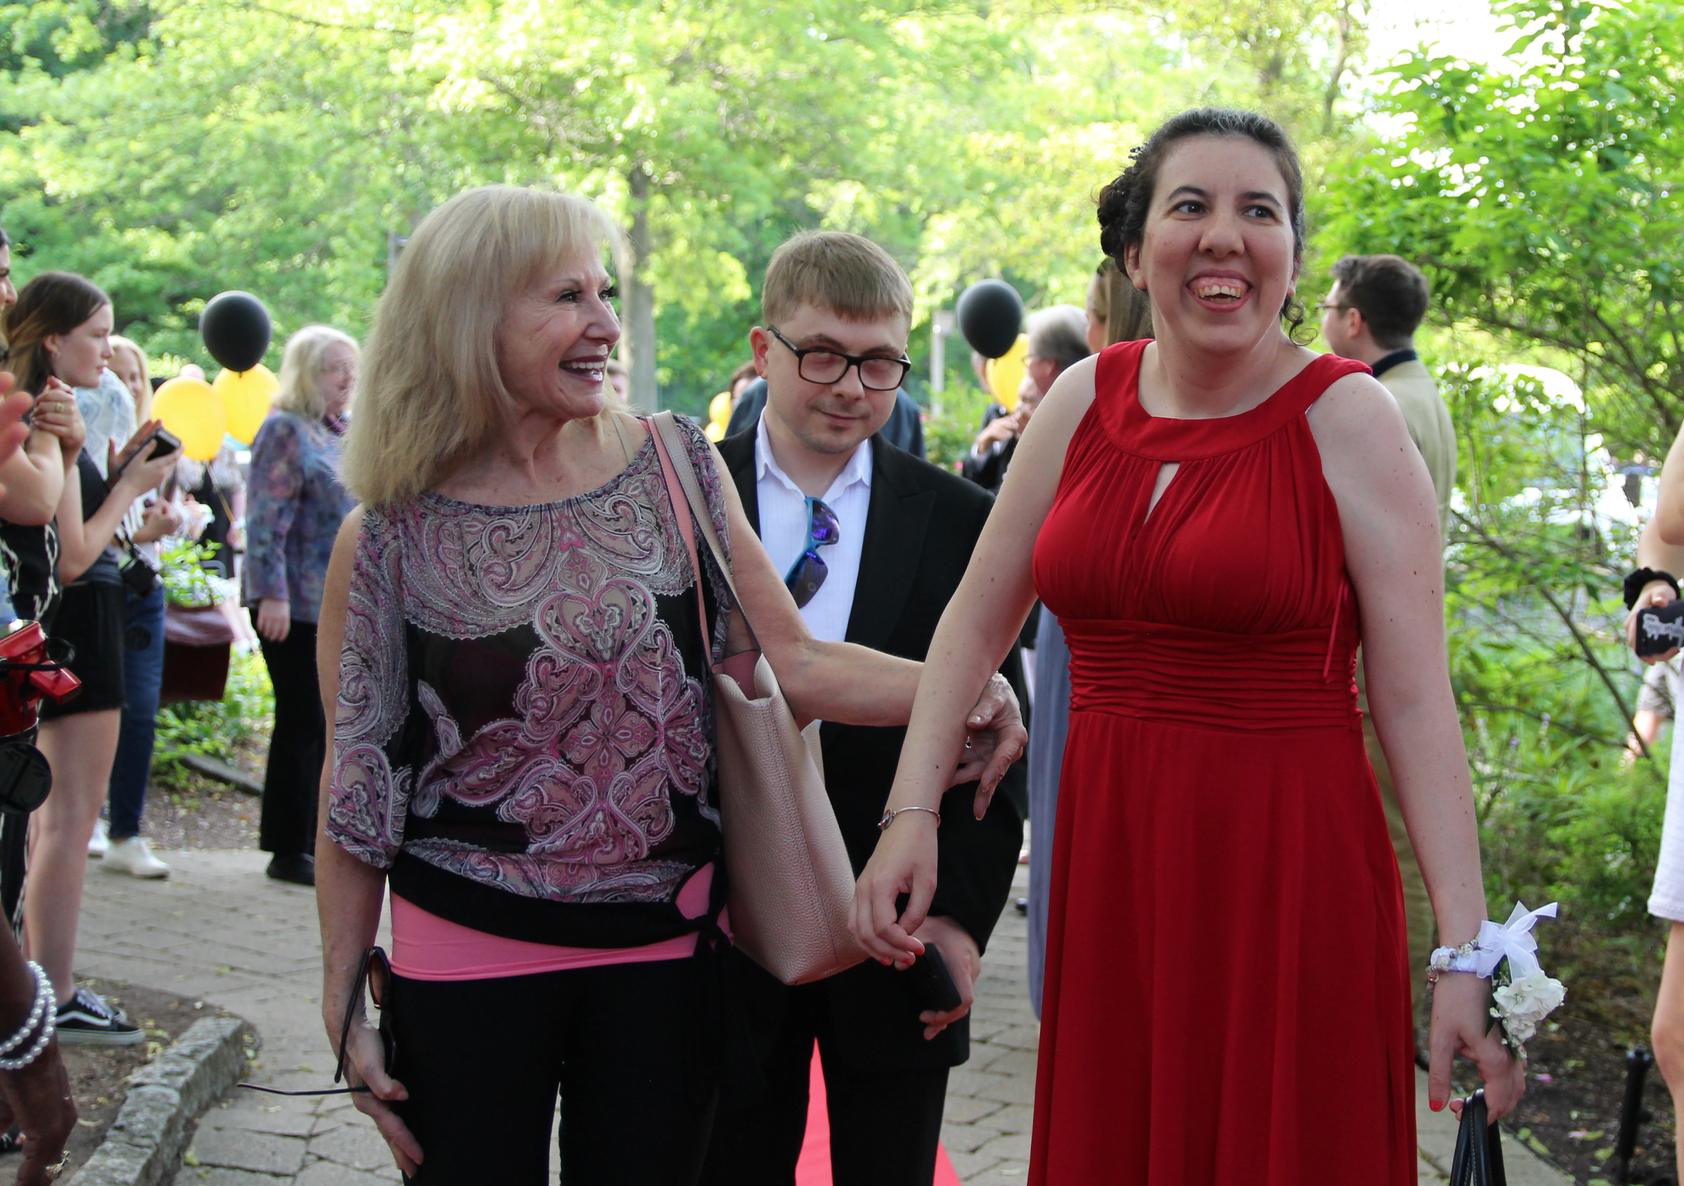 The first ever "Together We Shine" dance was held at the Greenwich YWCA on June 9. The event was organized by Greenwich Jr United Way for people from Abilis and teens from several clubs at Greenwich High School. June 9, 2018 Photo: Leslie Yager